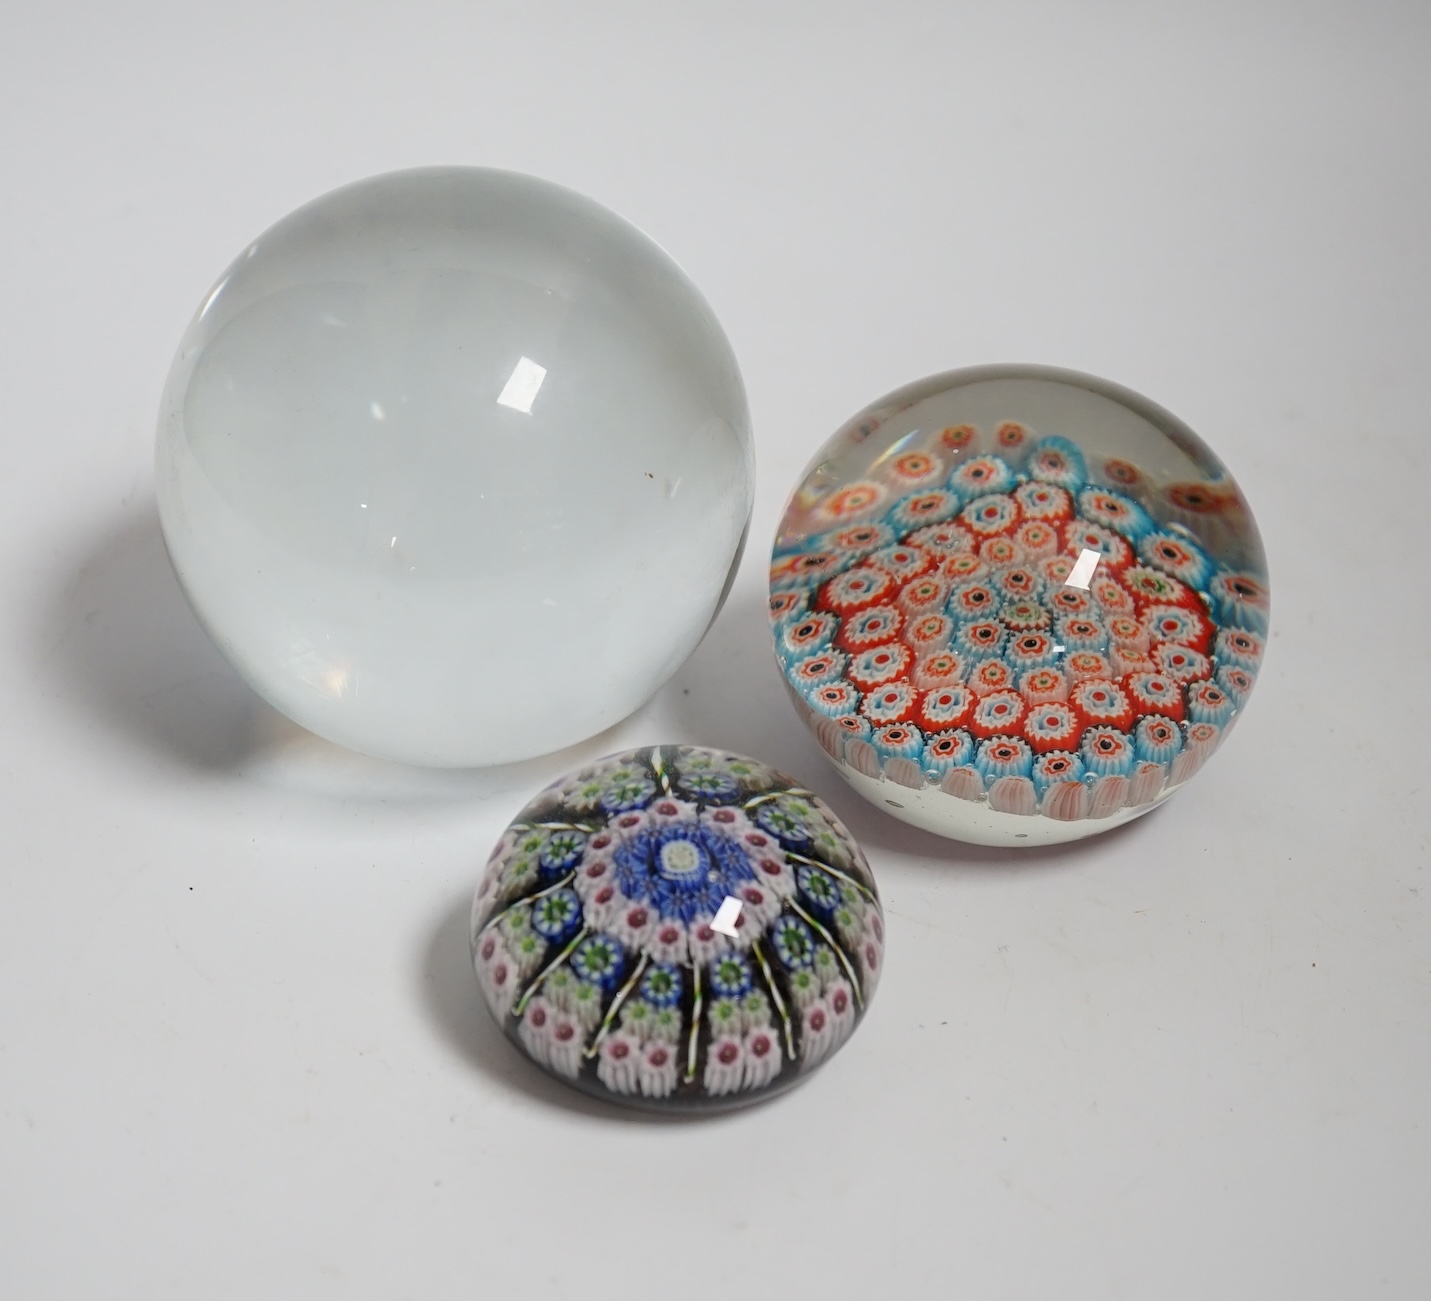 Two millefiori paperweights and a glass ball, largest 10cm in diameter